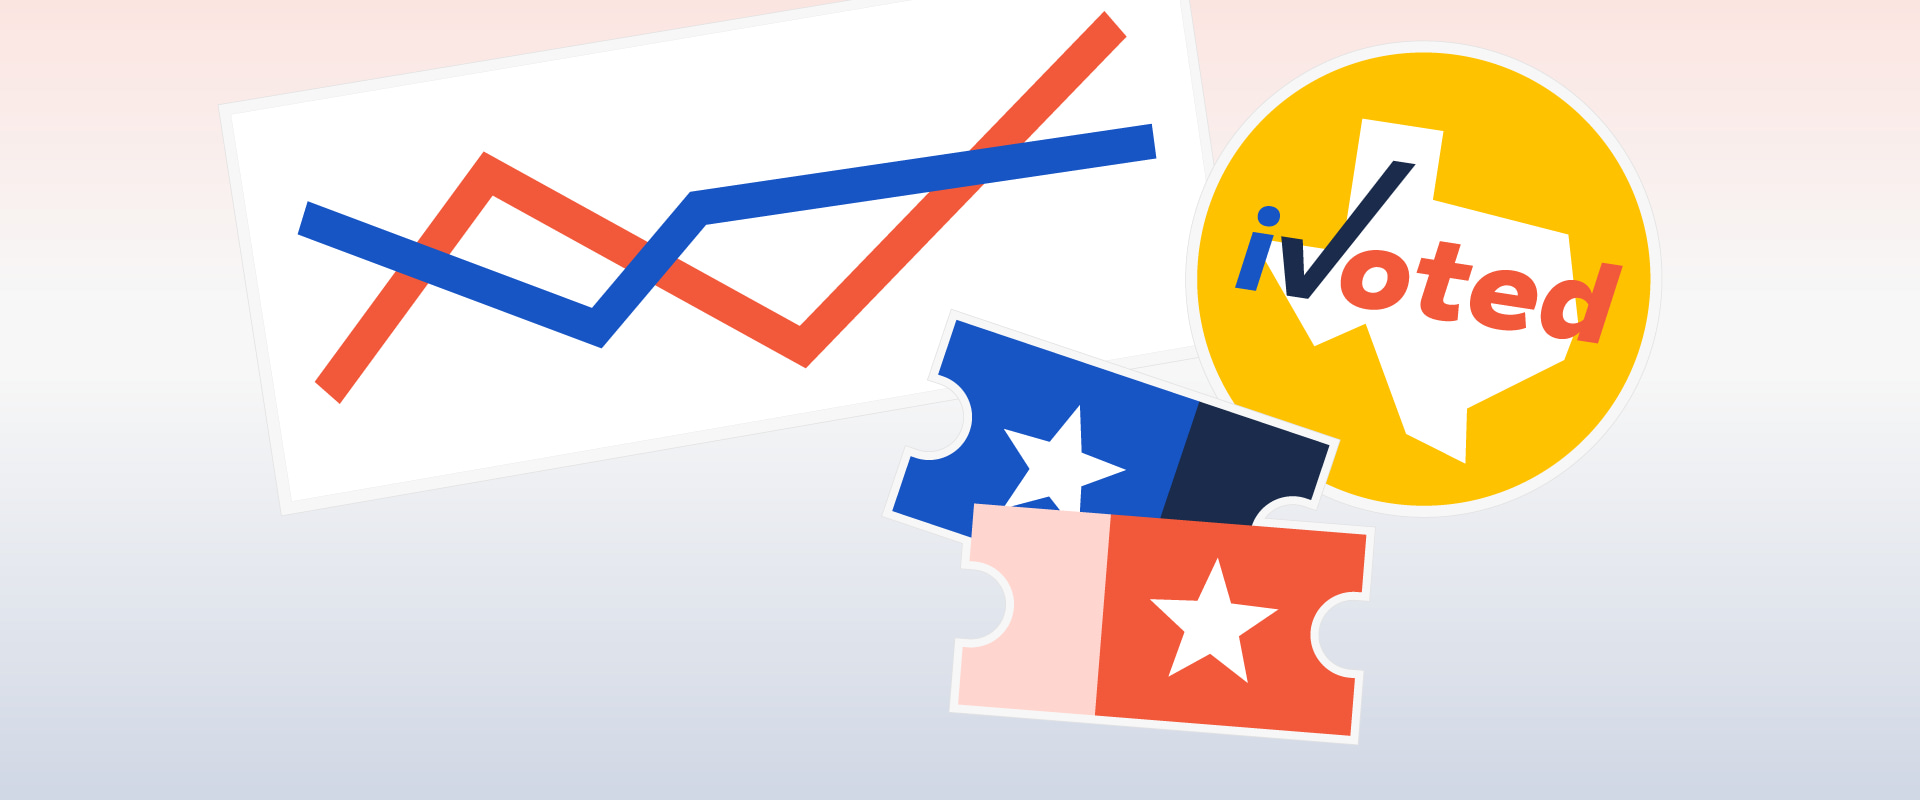 Voter Turnout Rate in Bexar County: What You Need to Know